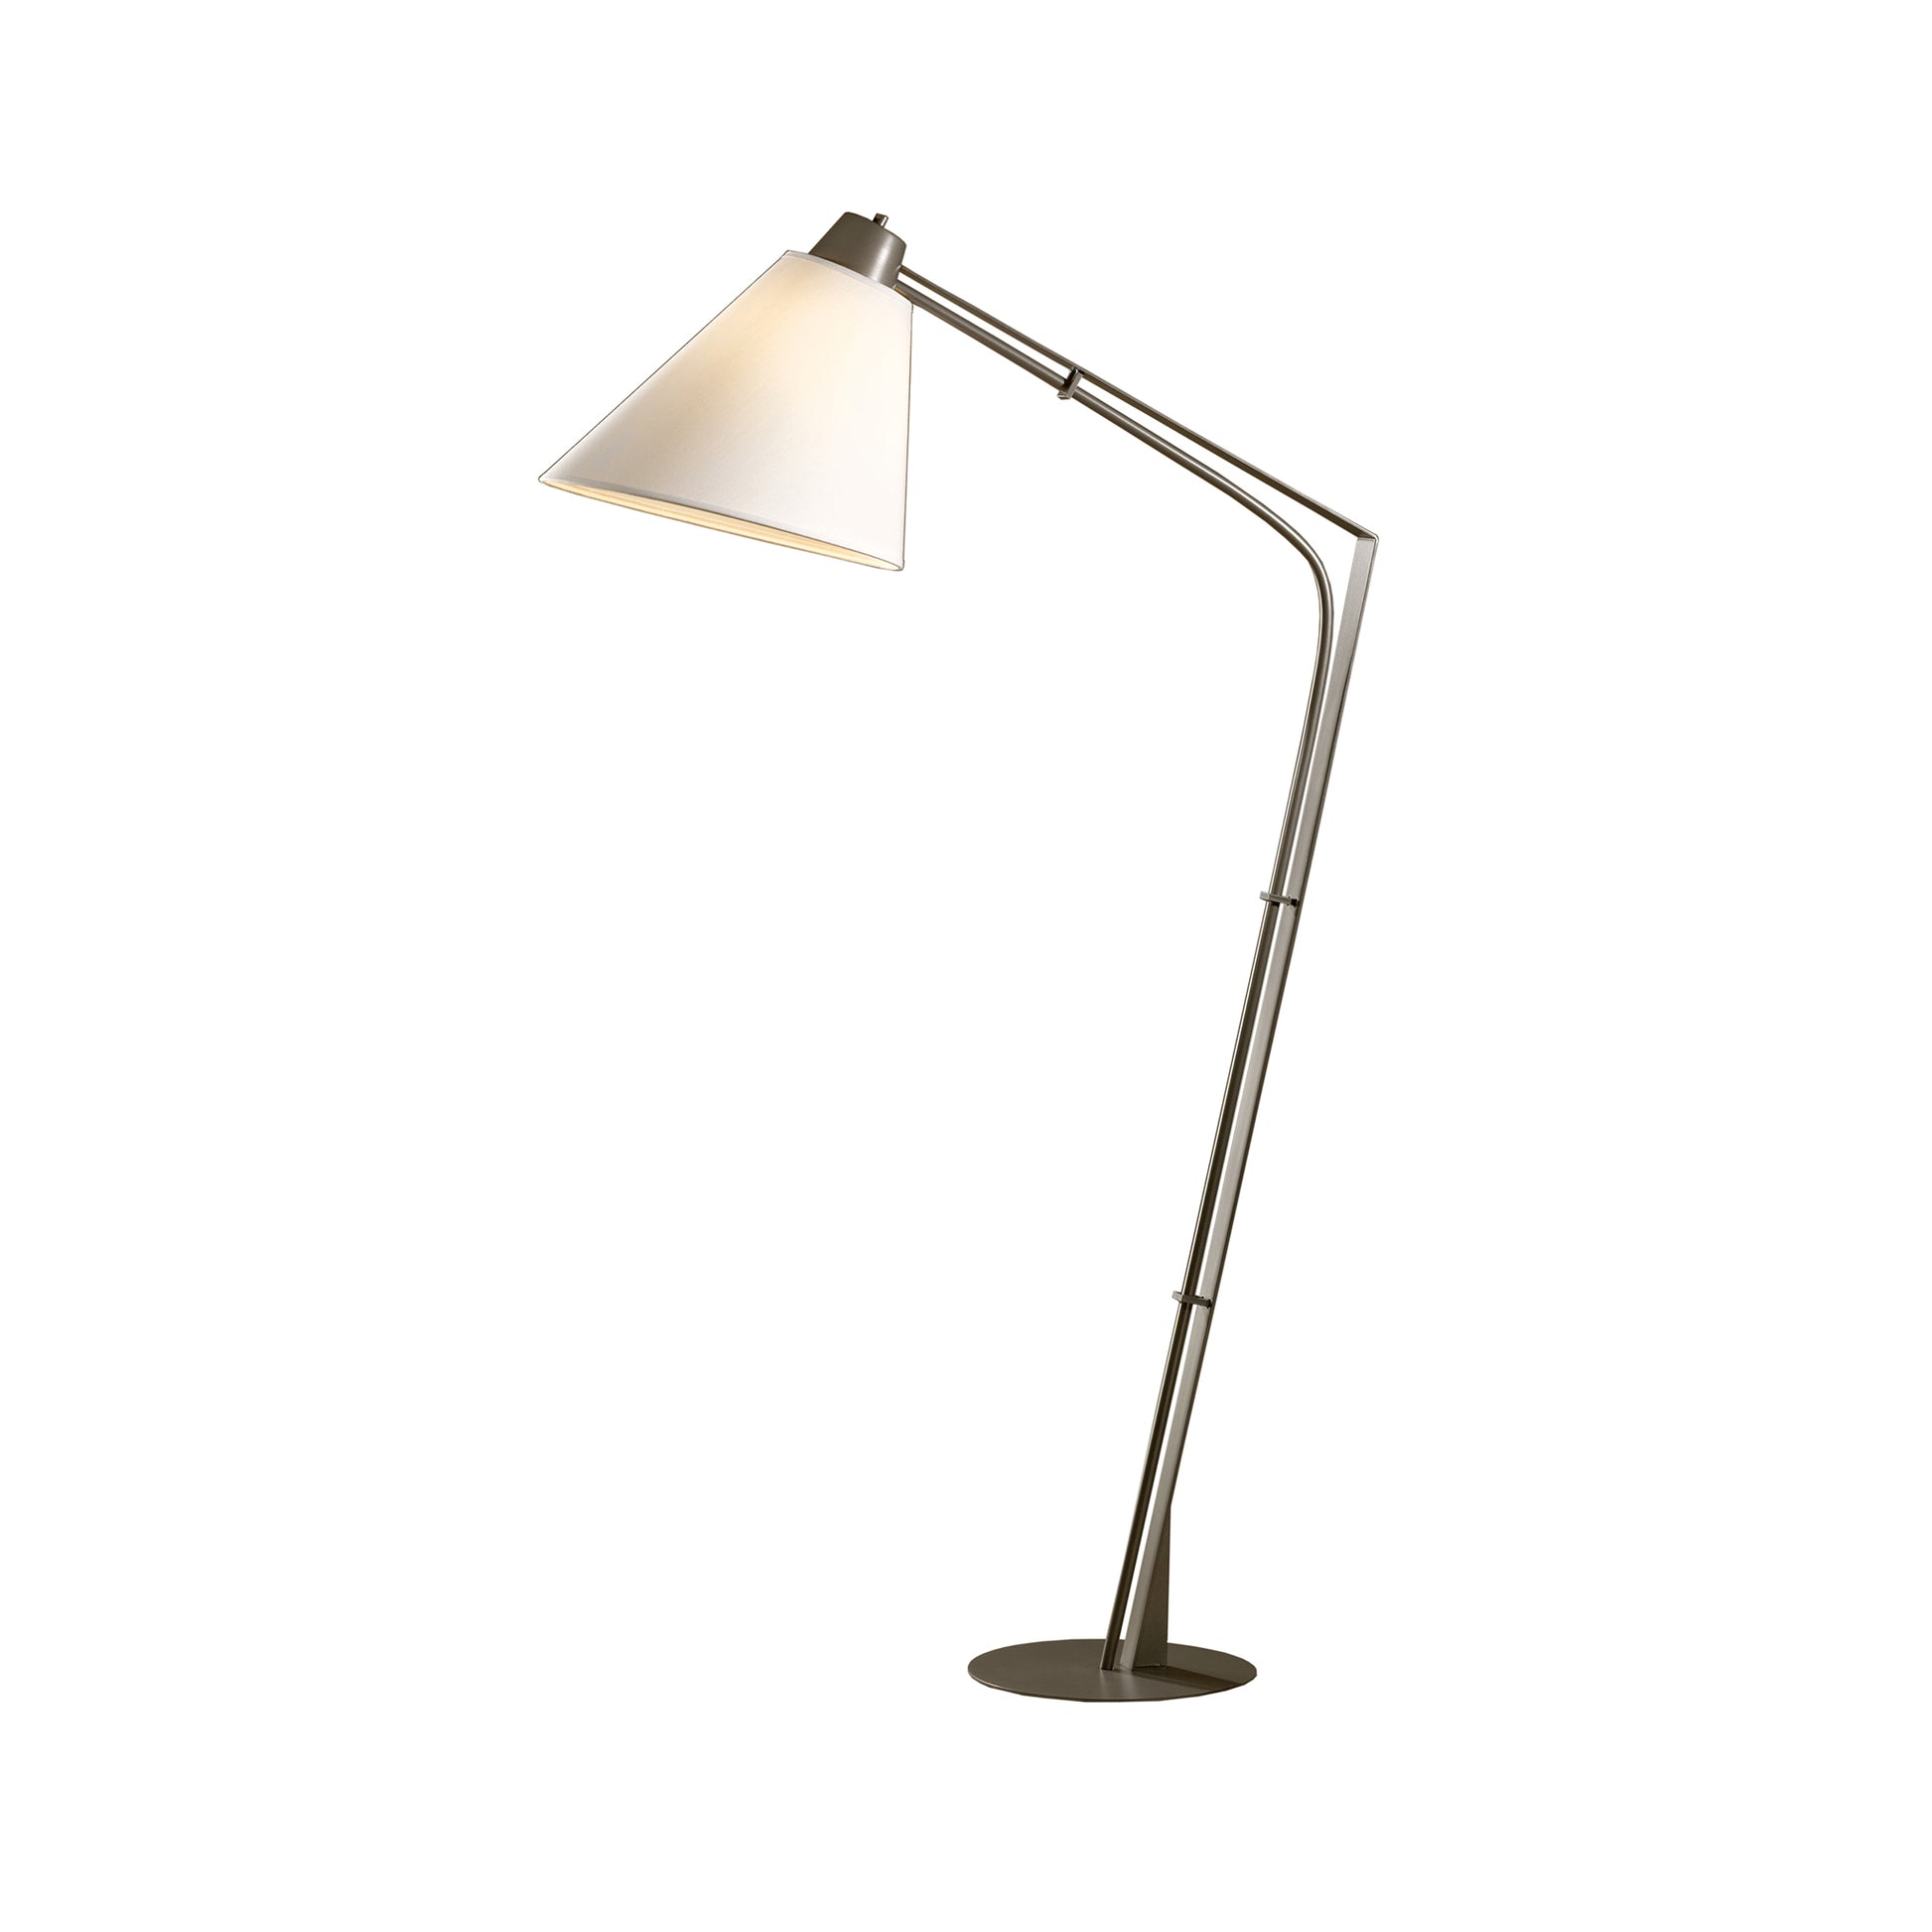 A Hubbardton Forge Reach Floor Lamp with a white shade on a white background, providing a retro chic ambiance.